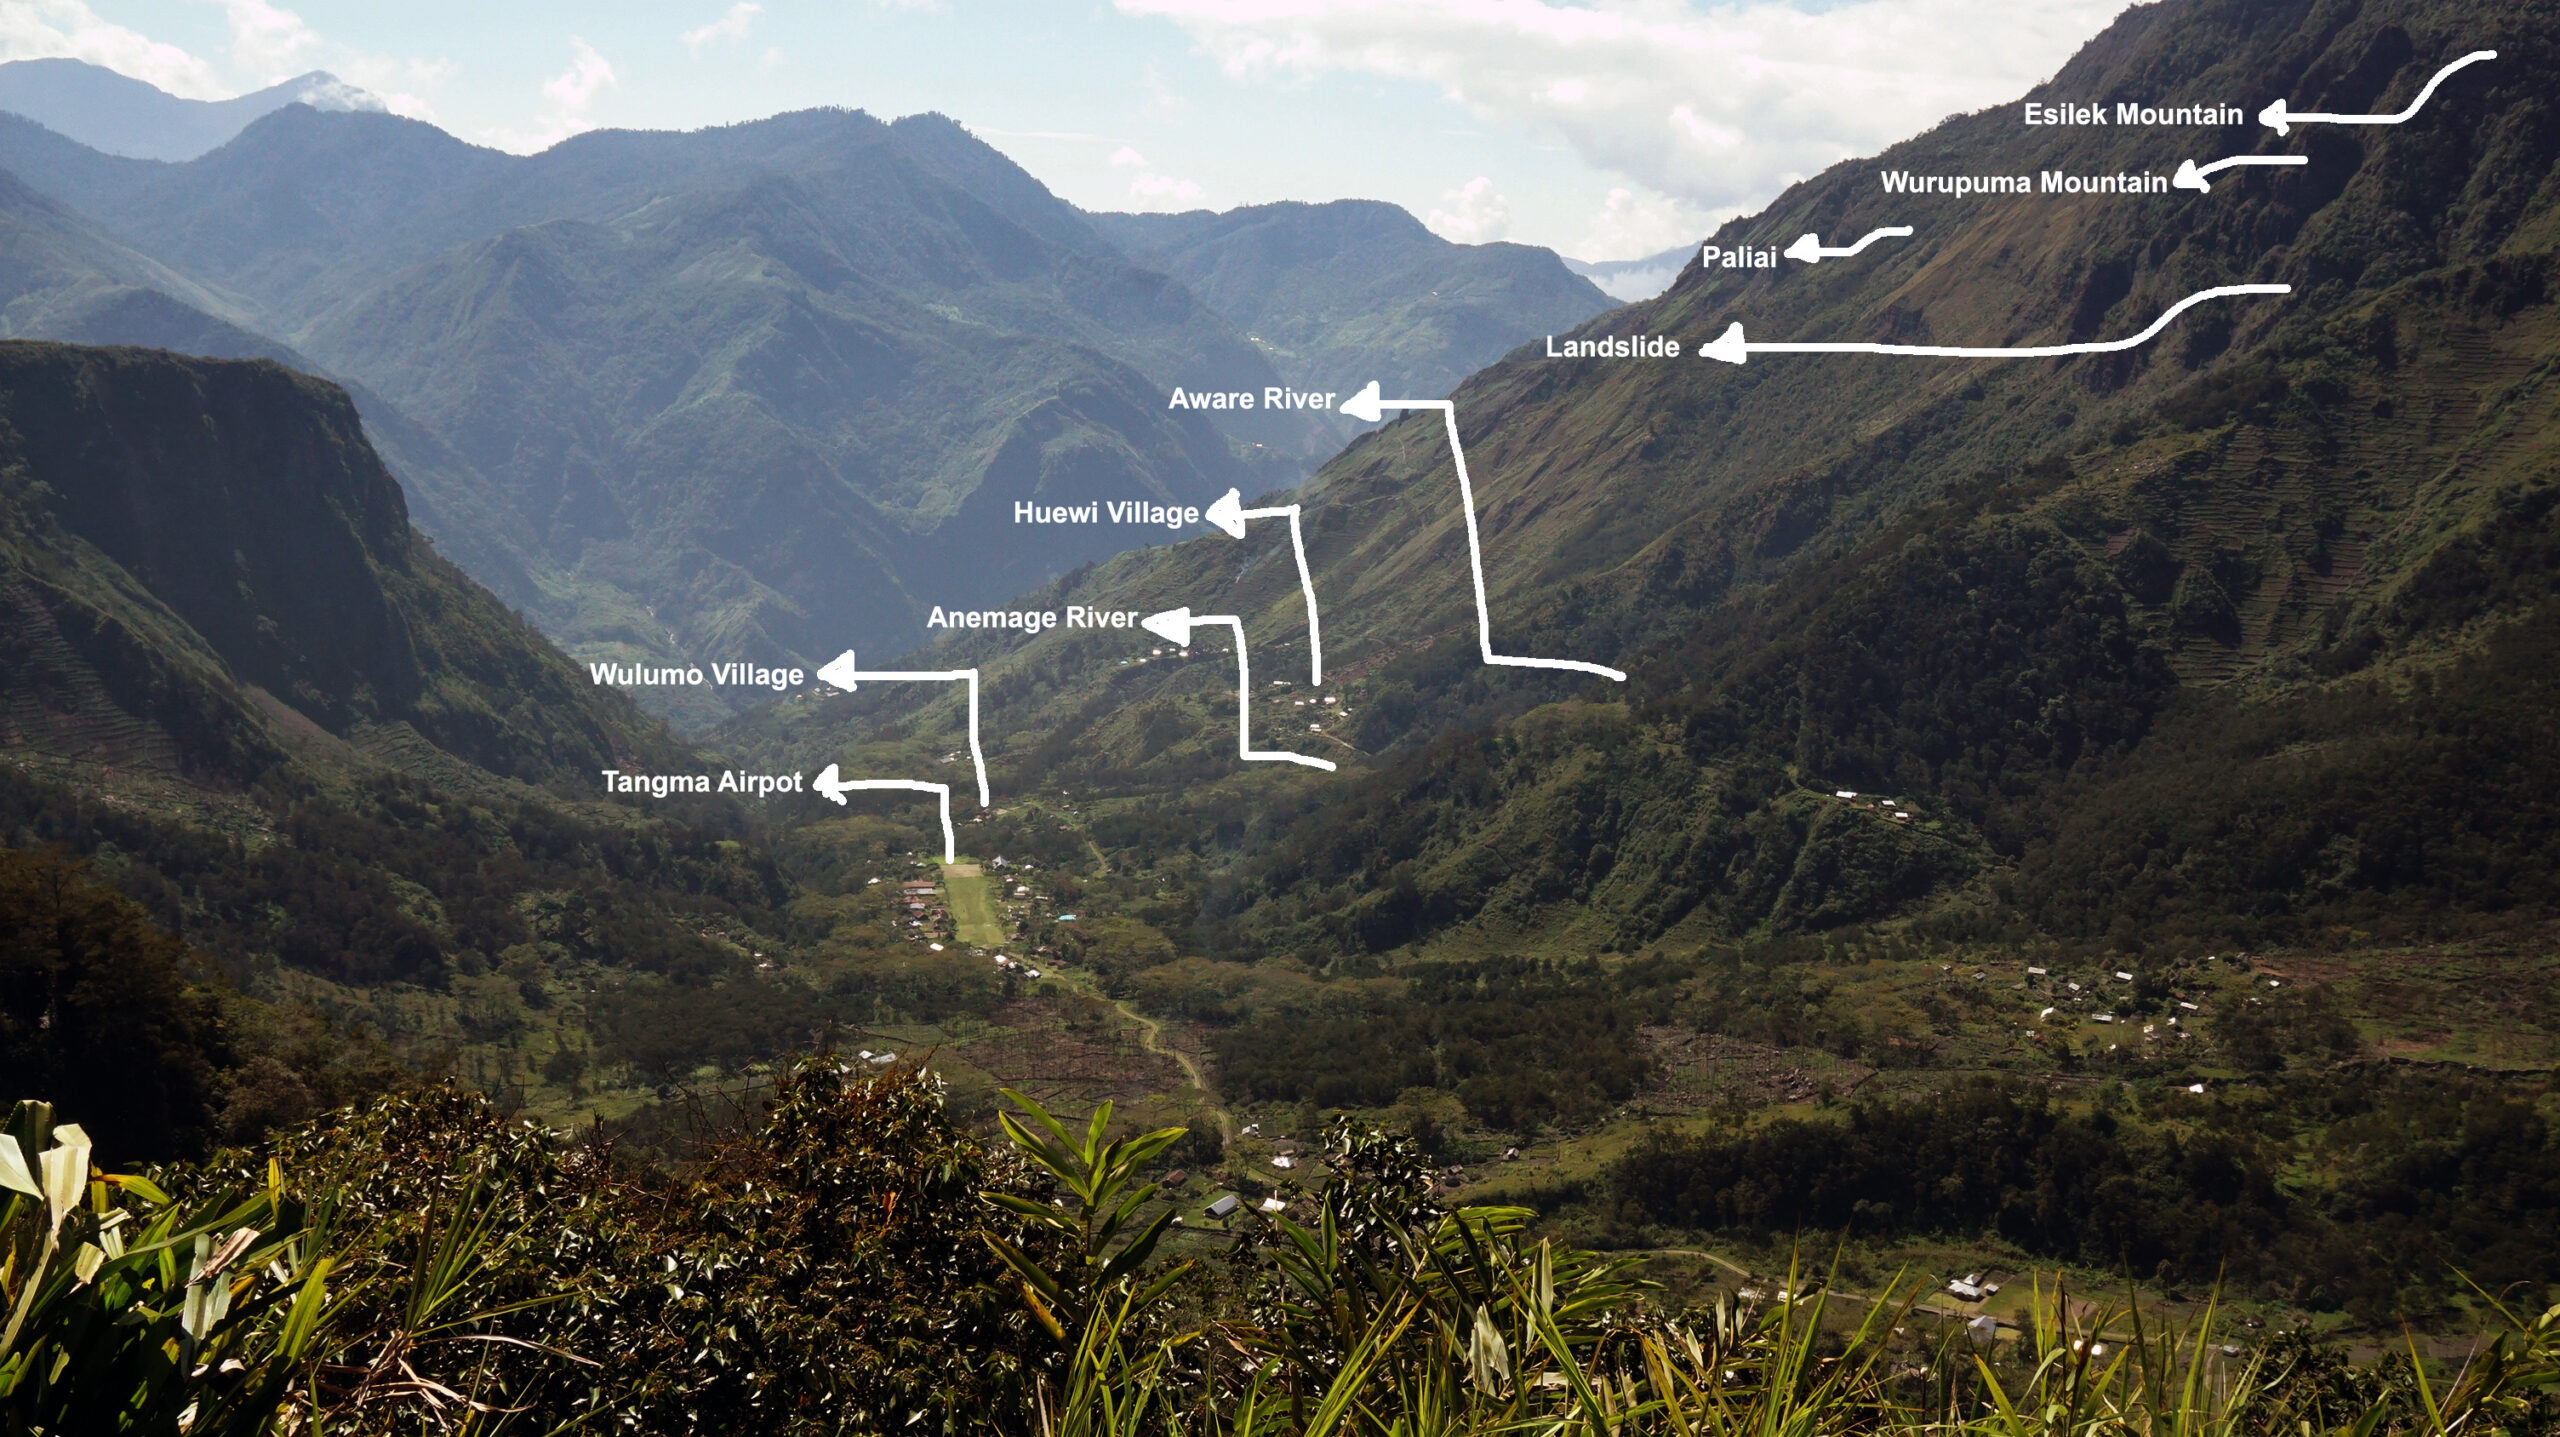 Photo of the mountains with notations about different areas of interest